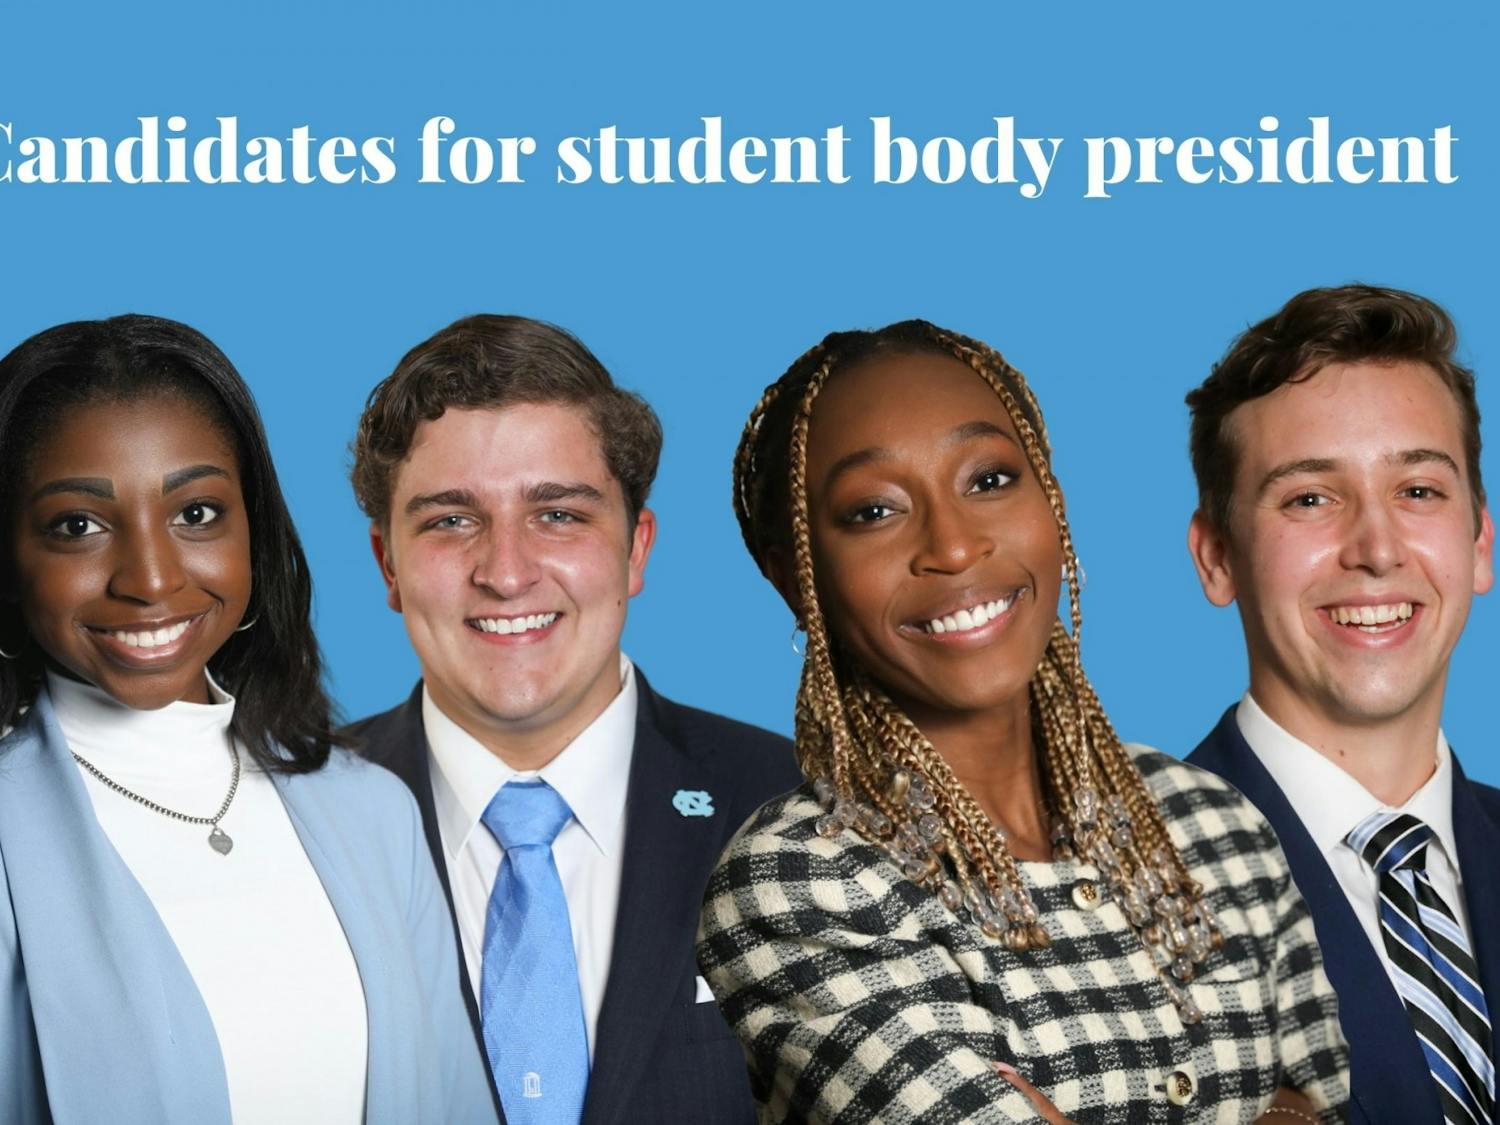 Candidates for Student Body President (1).jpg